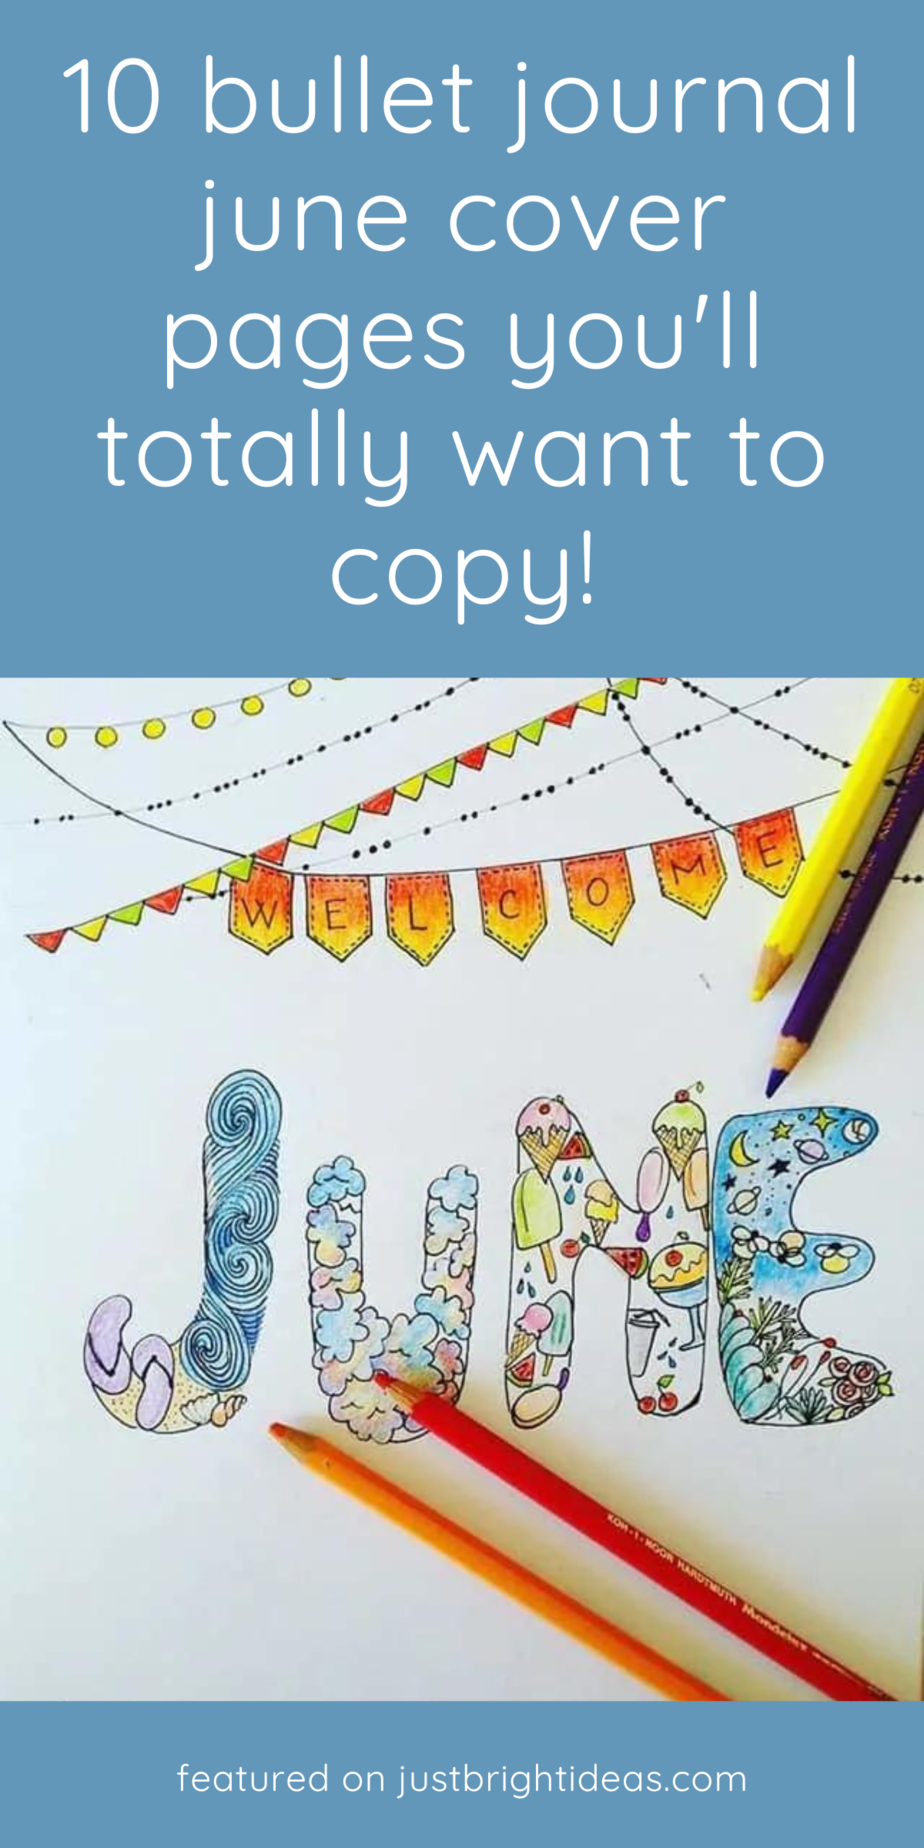 📝 Are you ready to start setting up your bullet journal for June? 🕶️ Check out these fabulous ideas to inspire you! 